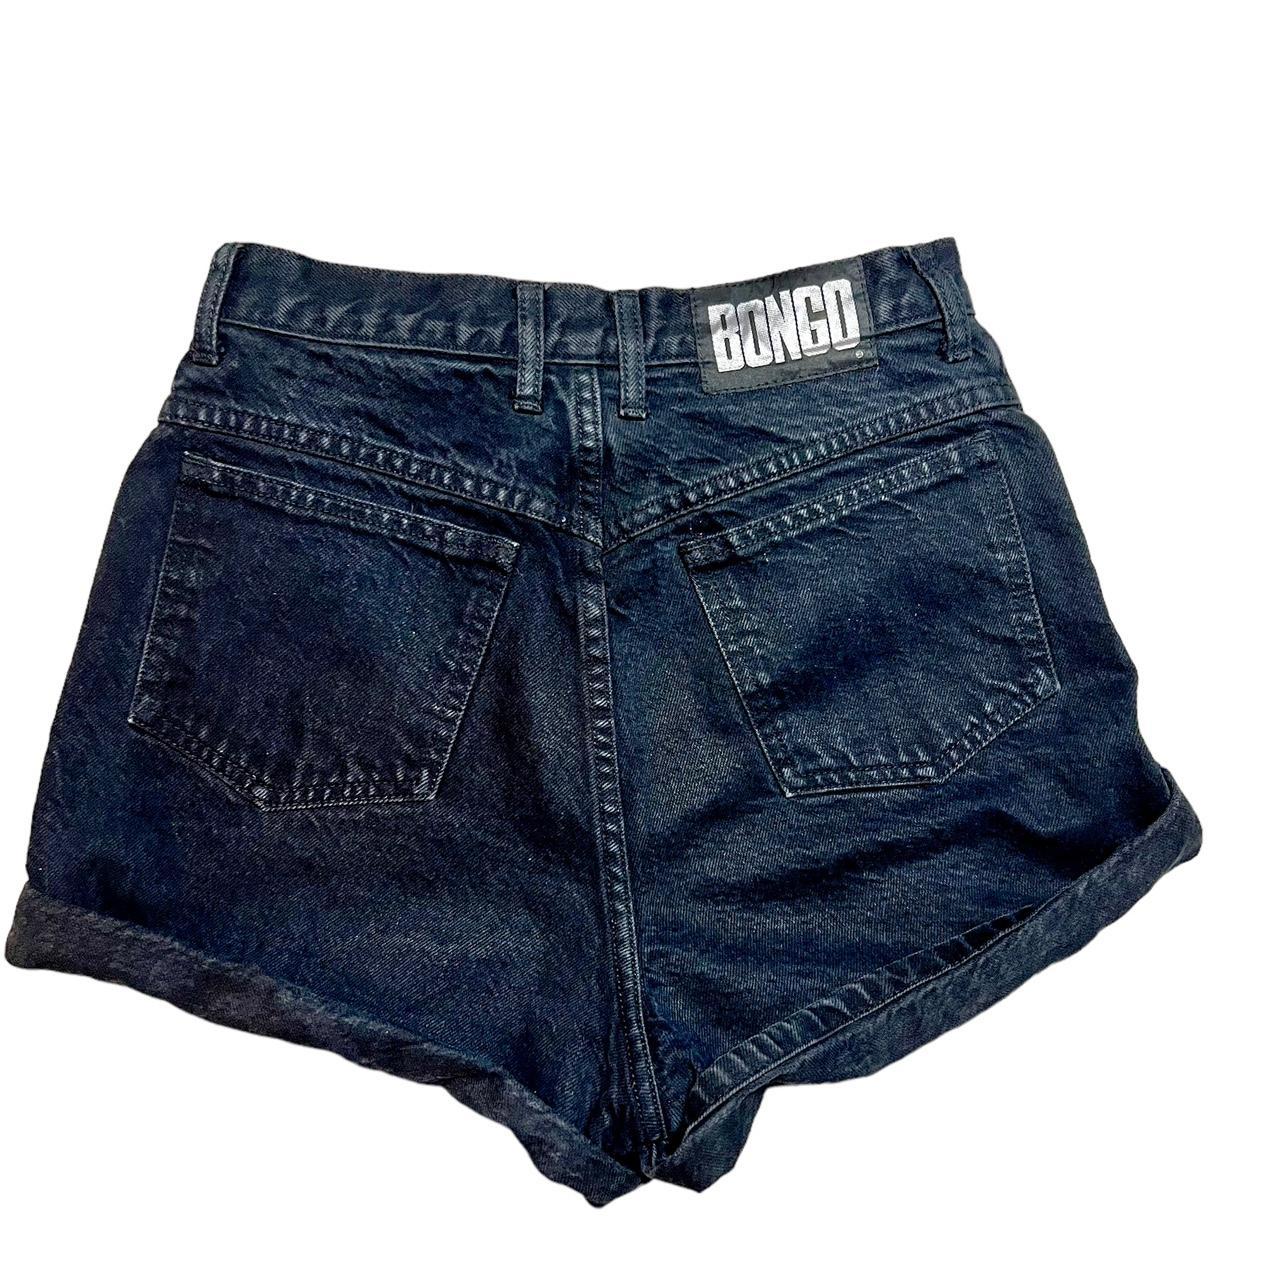 Vintage Bongo high waisted denim shorts. This is a... - Depop